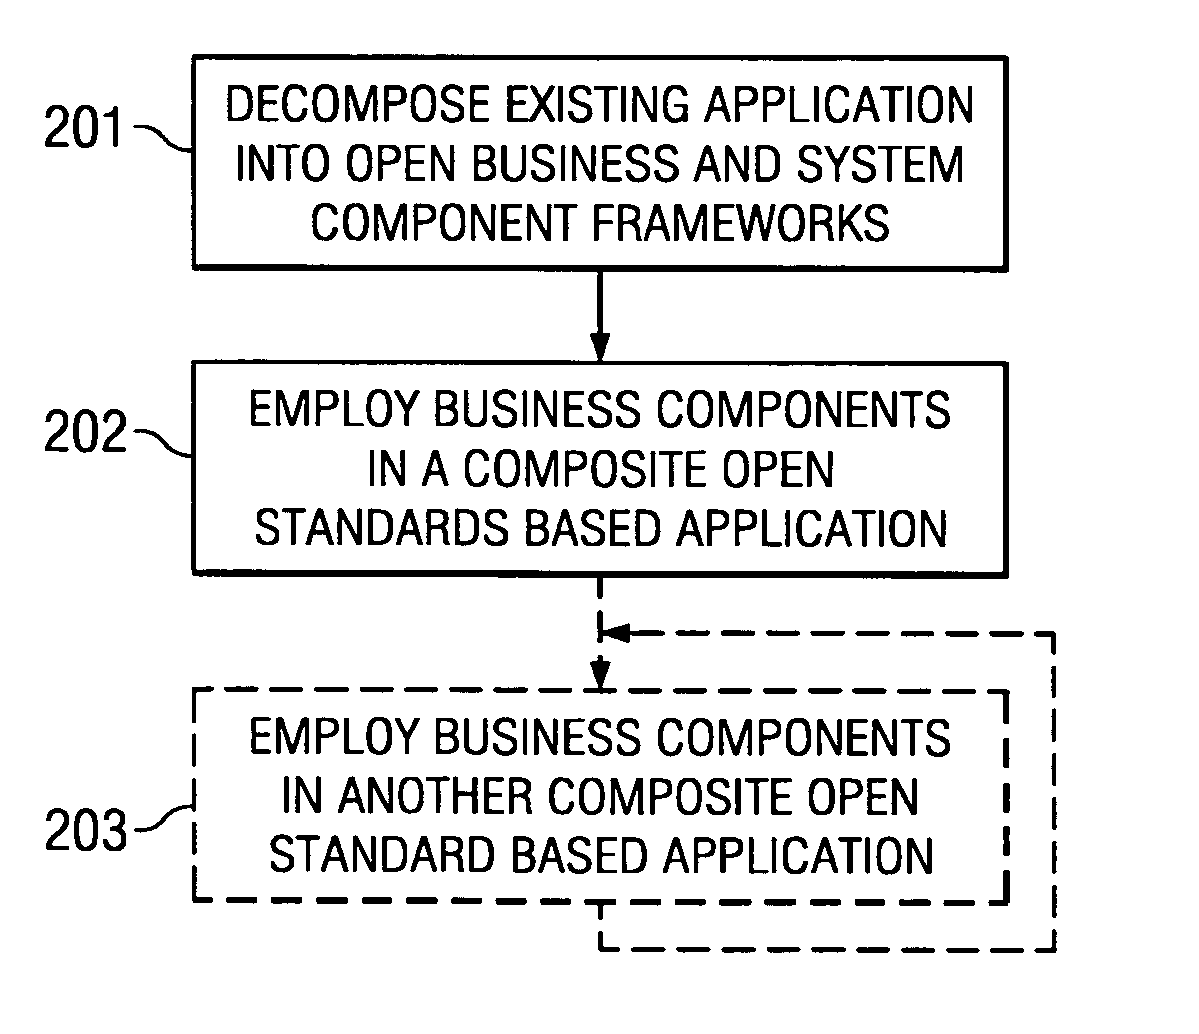 Systems and methods for modeling and generating reusable application component frameworks, and automated assembly of service-oriented applications from existing applications